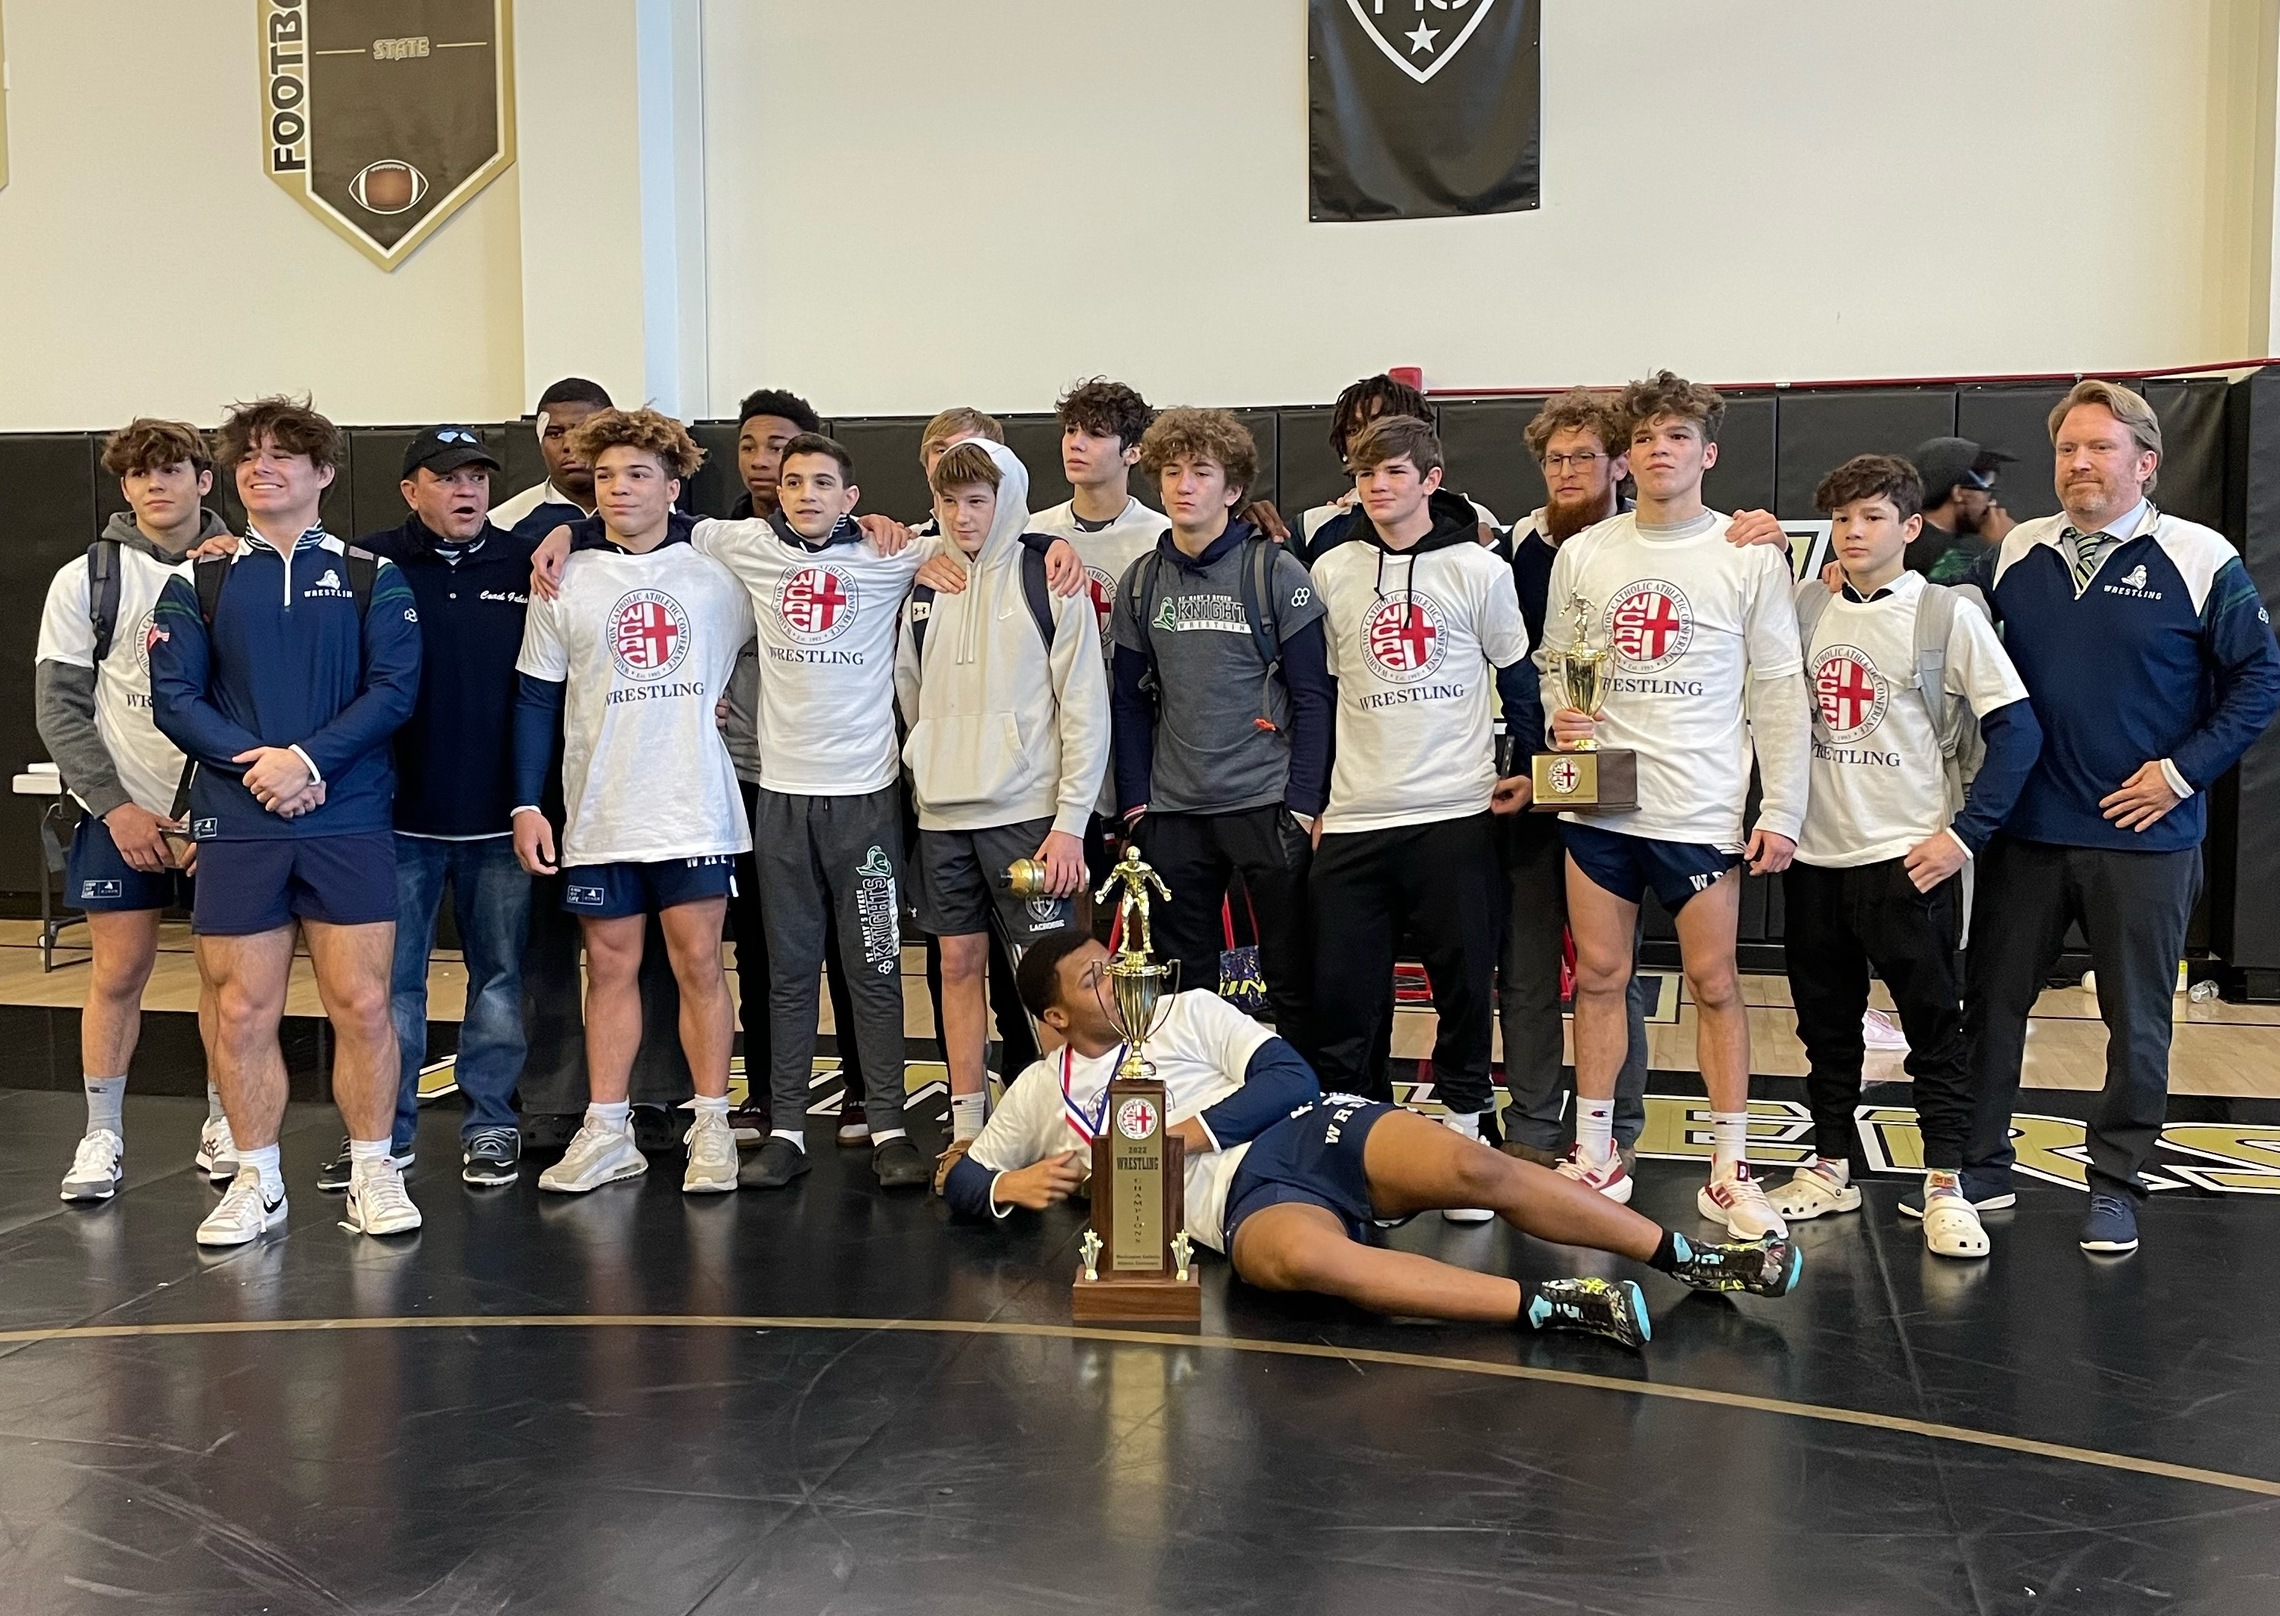 St. Mary&rsquo;s Ryken dominates WCAC wrestling championships, beating field by more than 100 points